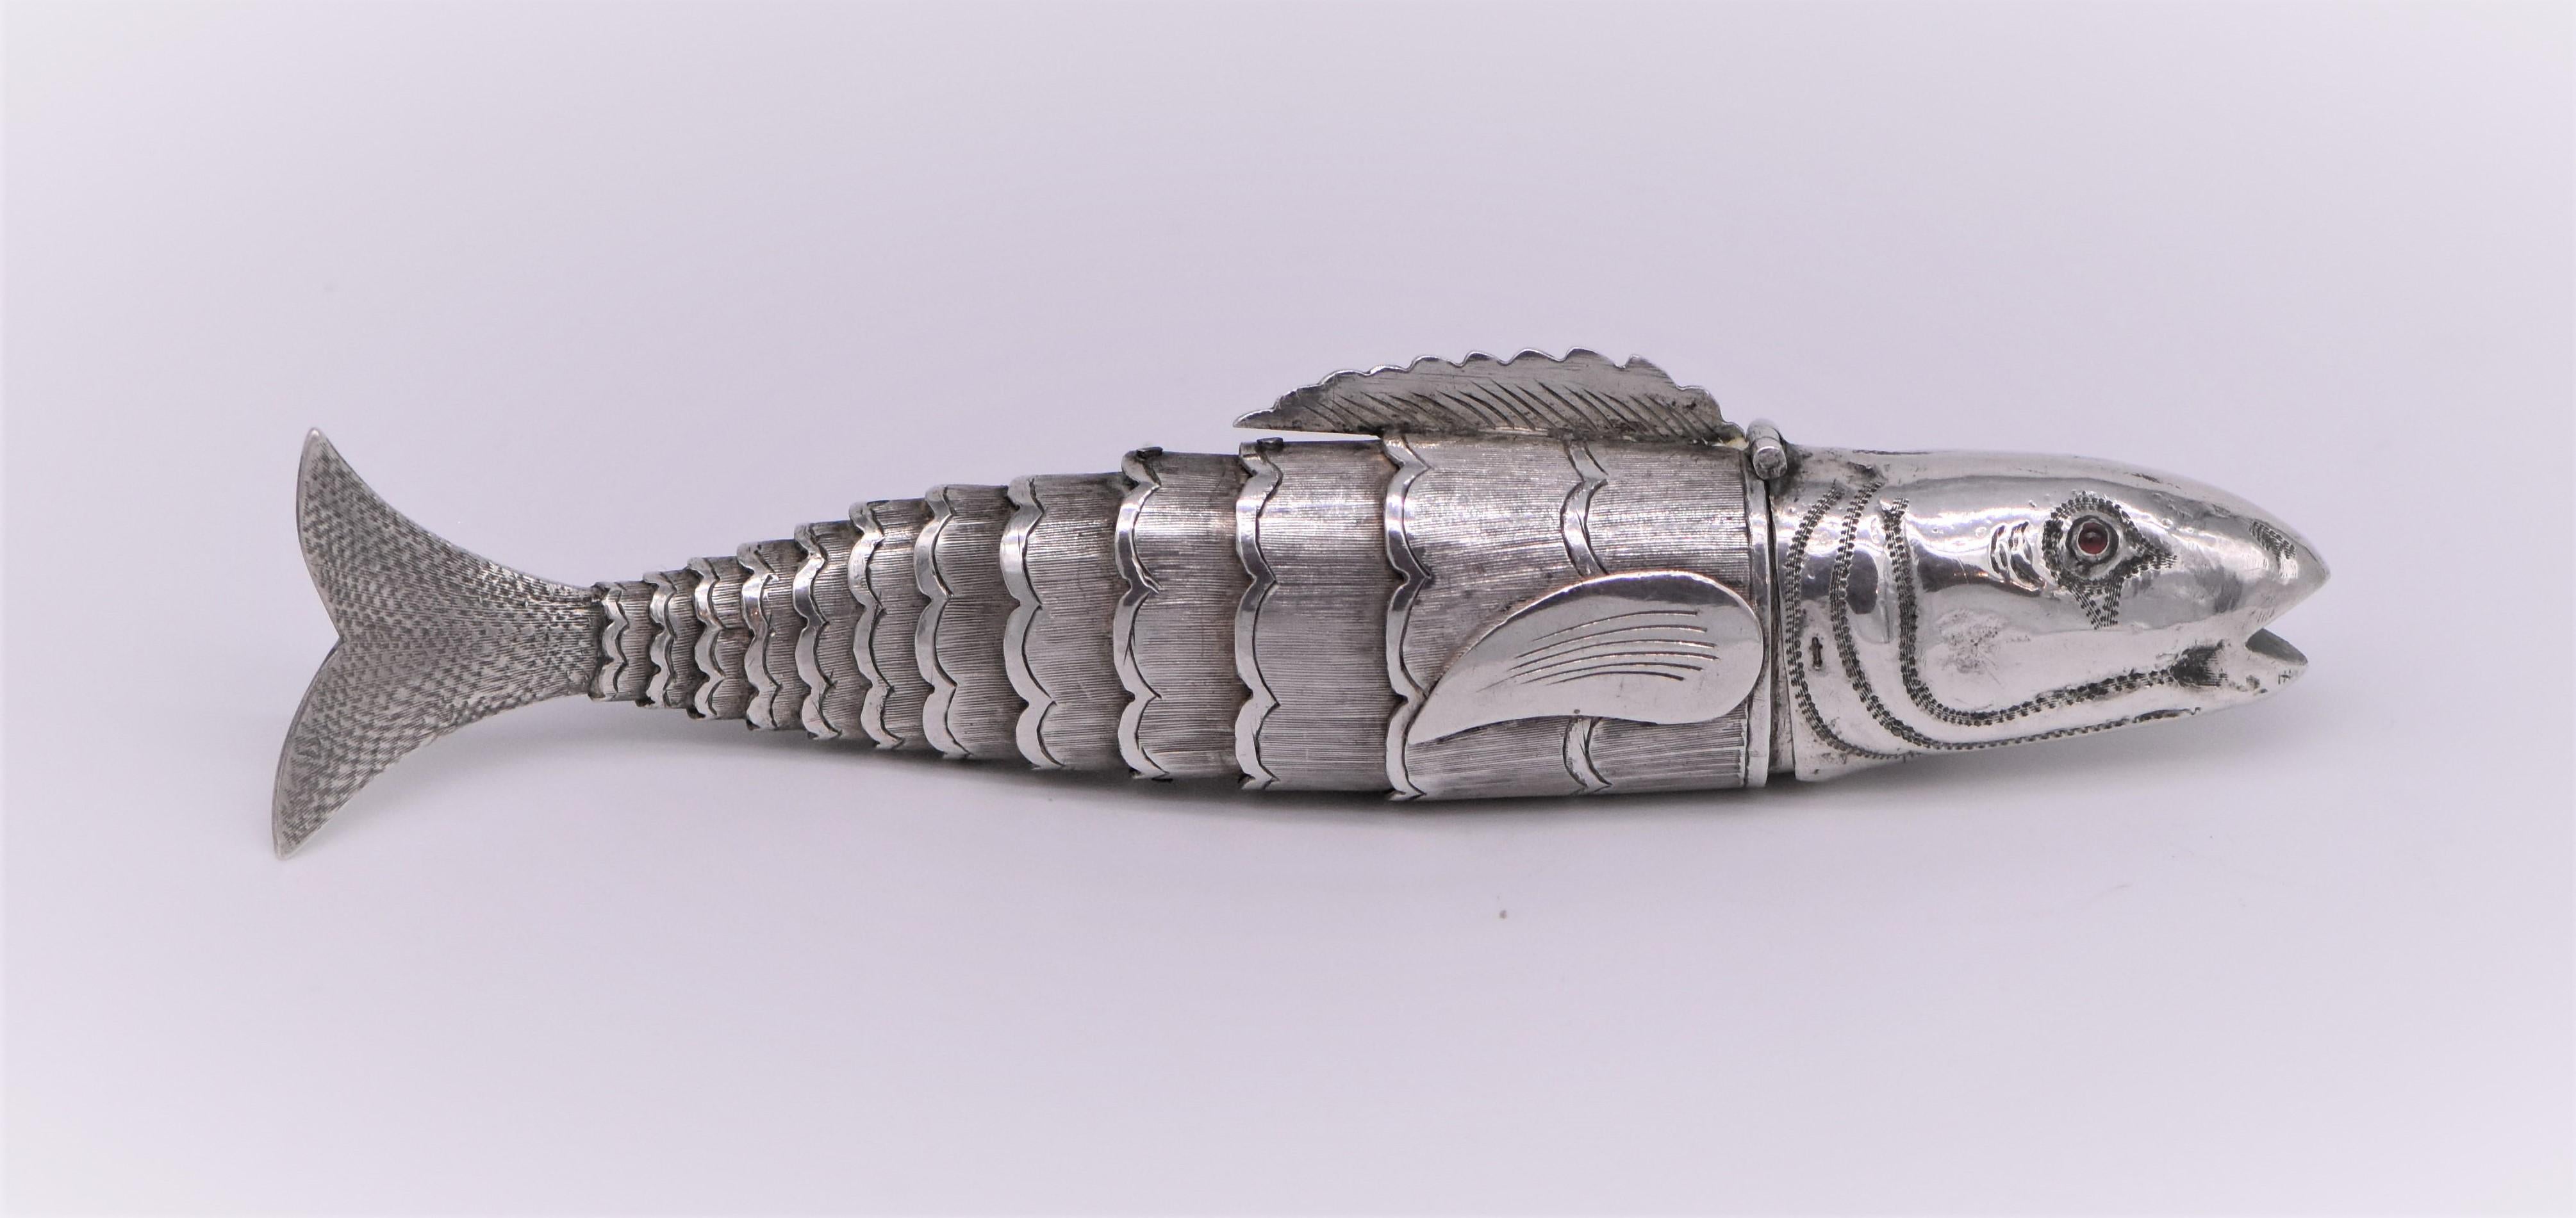 Handmade silver fish shaped spice container, circa 1900. 
Traditionally Judaica Item used for Besamim Spices. The fish is finely crafted and is made in such a way that it moves and curls like a fish in the water. The fish has a wide hinged lid at